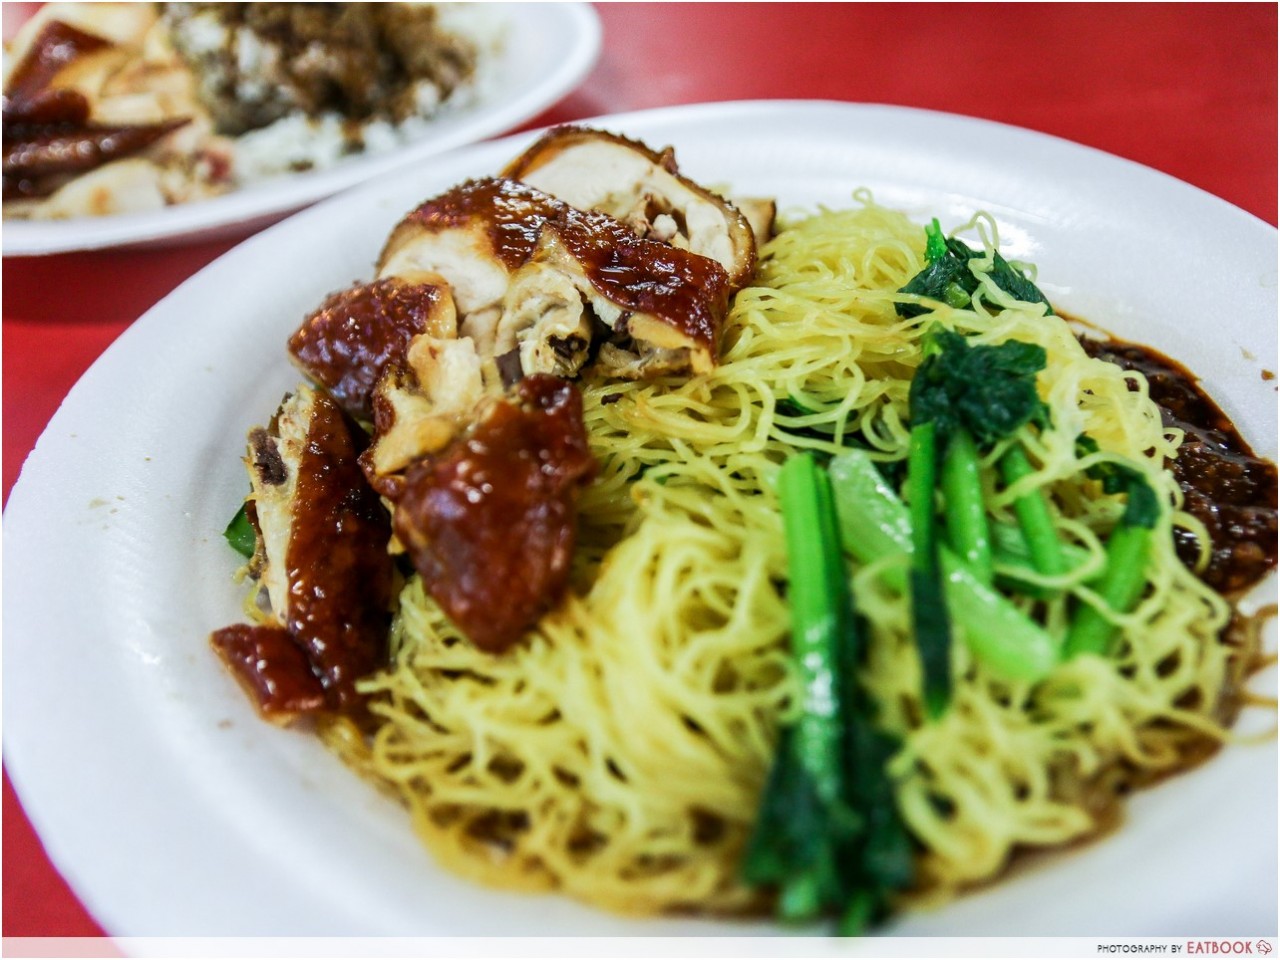 Liao Fan Hong Kong Soya Sauce Chicken Rice and Noodle